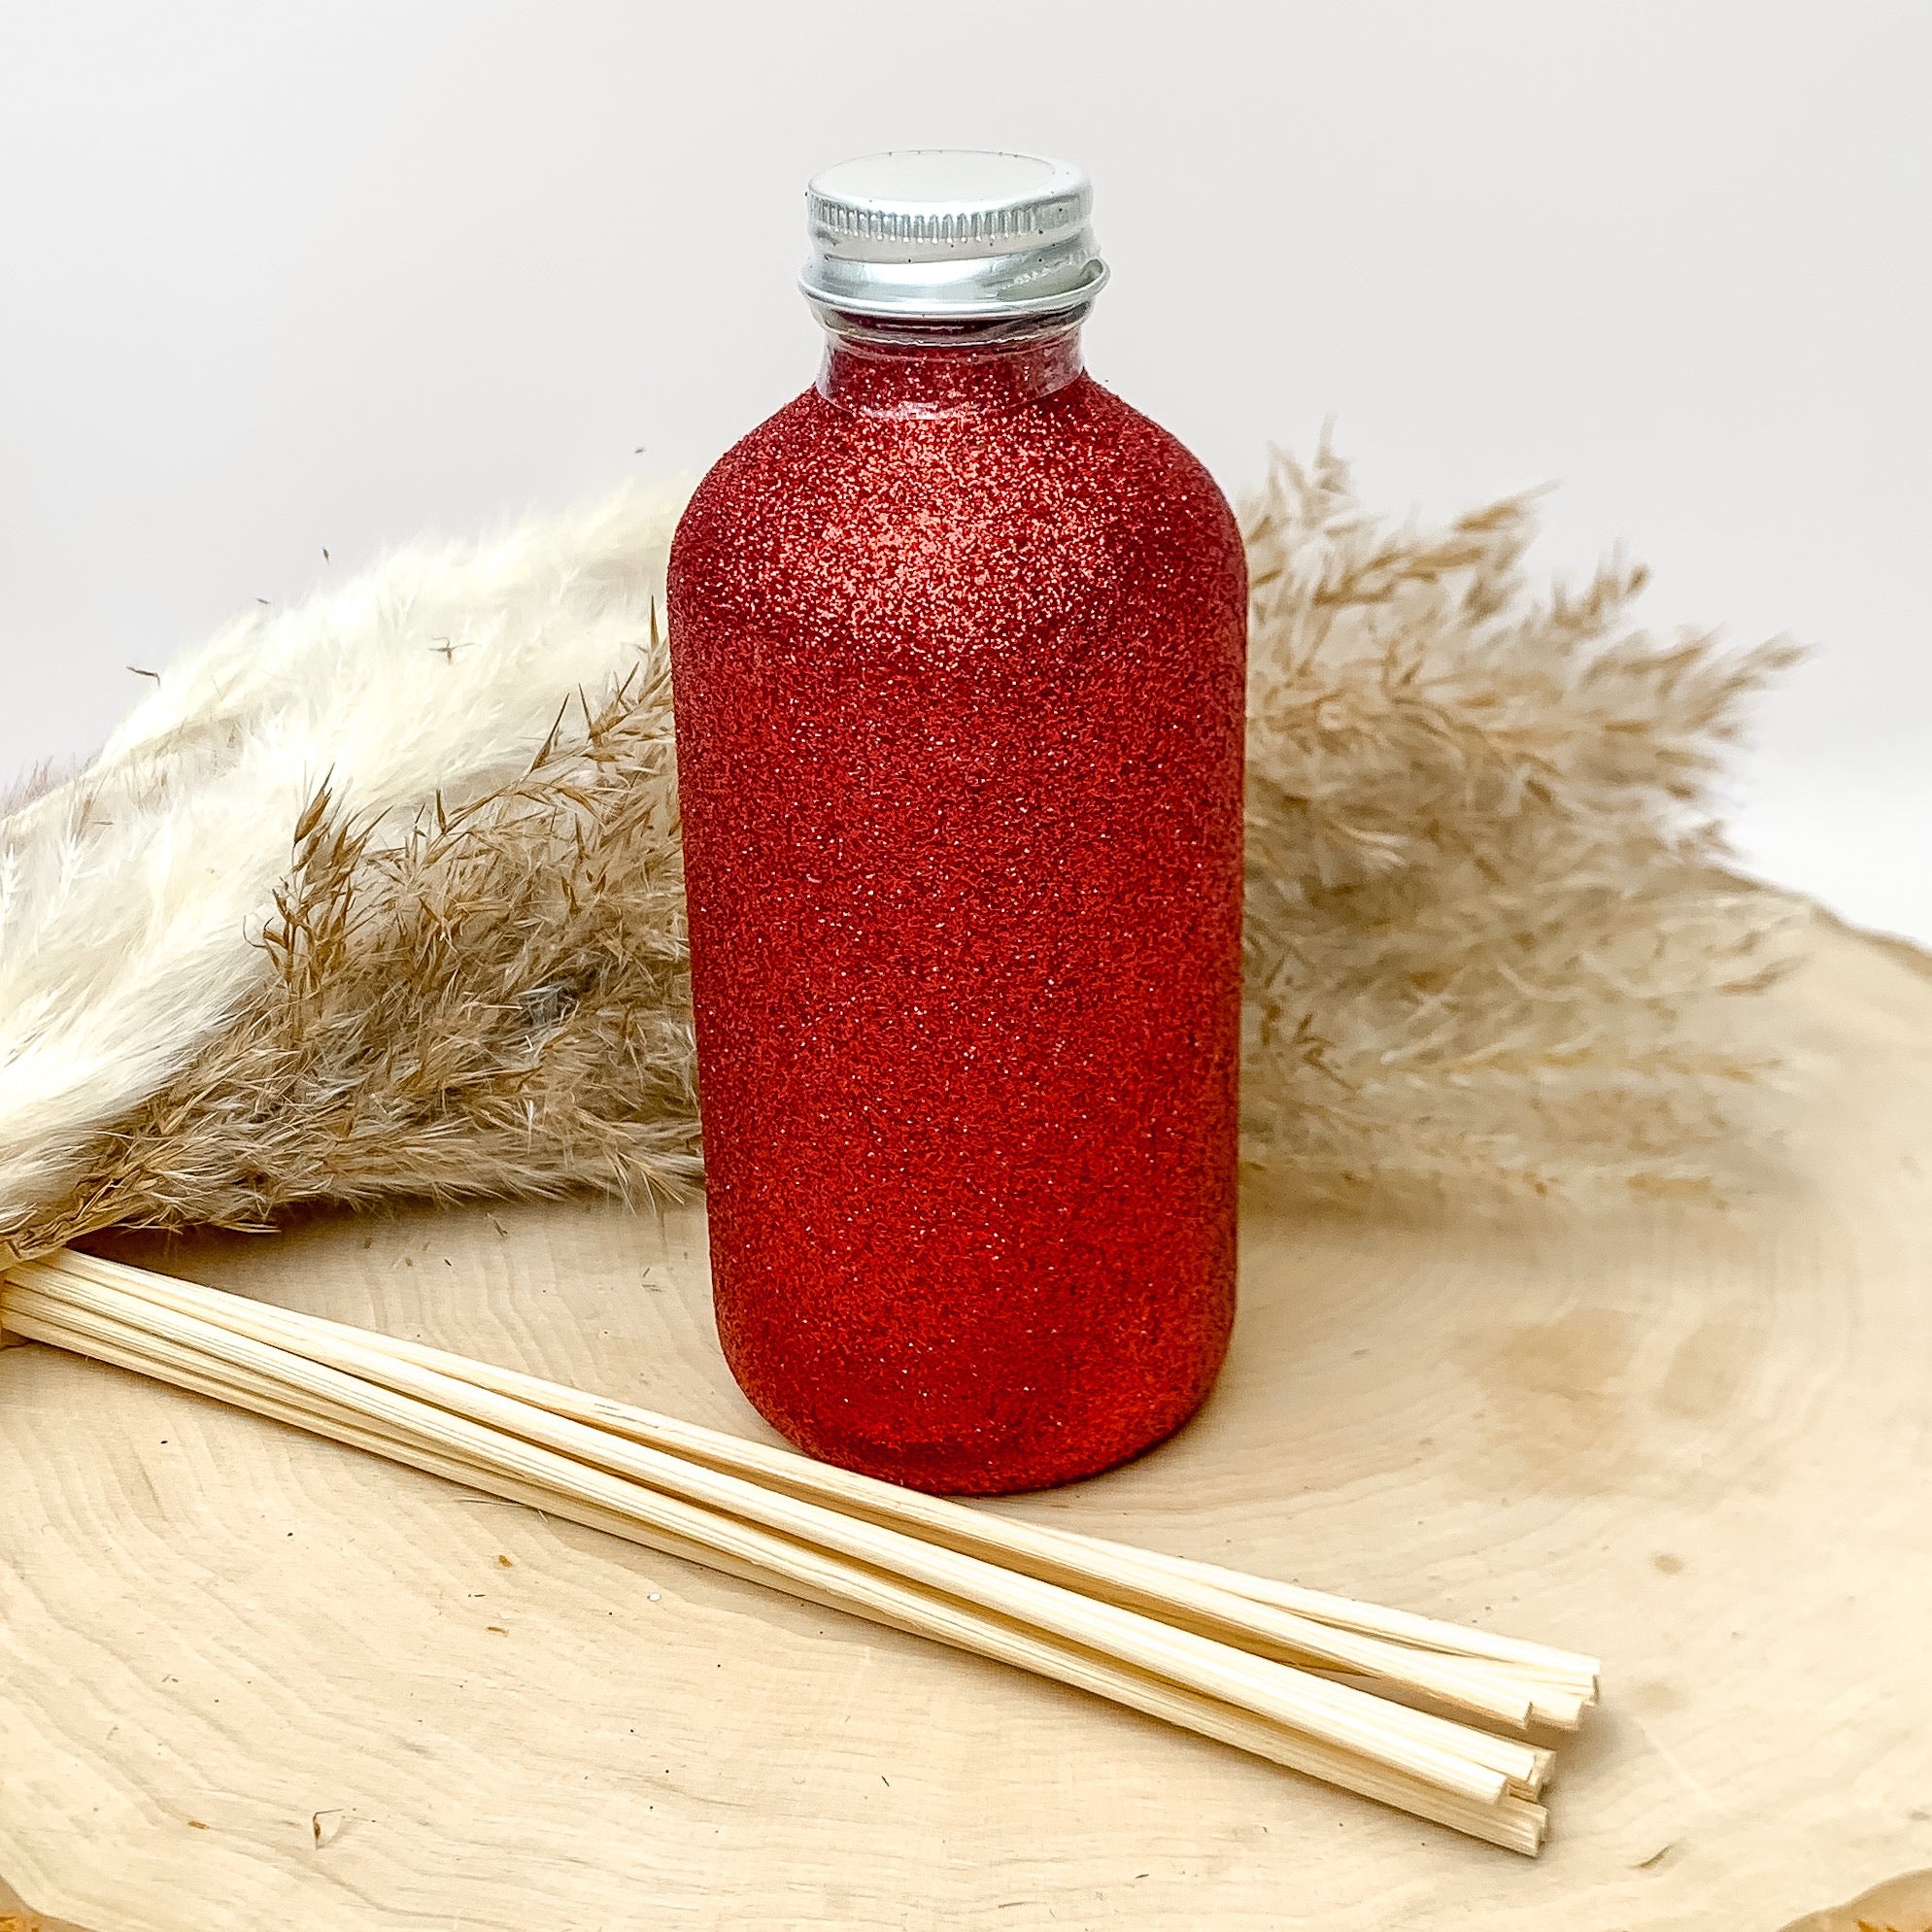 Capri blue red sparkly reed diffuser. There are wood sticks in front of the diffuser to put in the bottle. The bottle is sitting on a wood piece with feathers behind it. The background of the picture is white. 